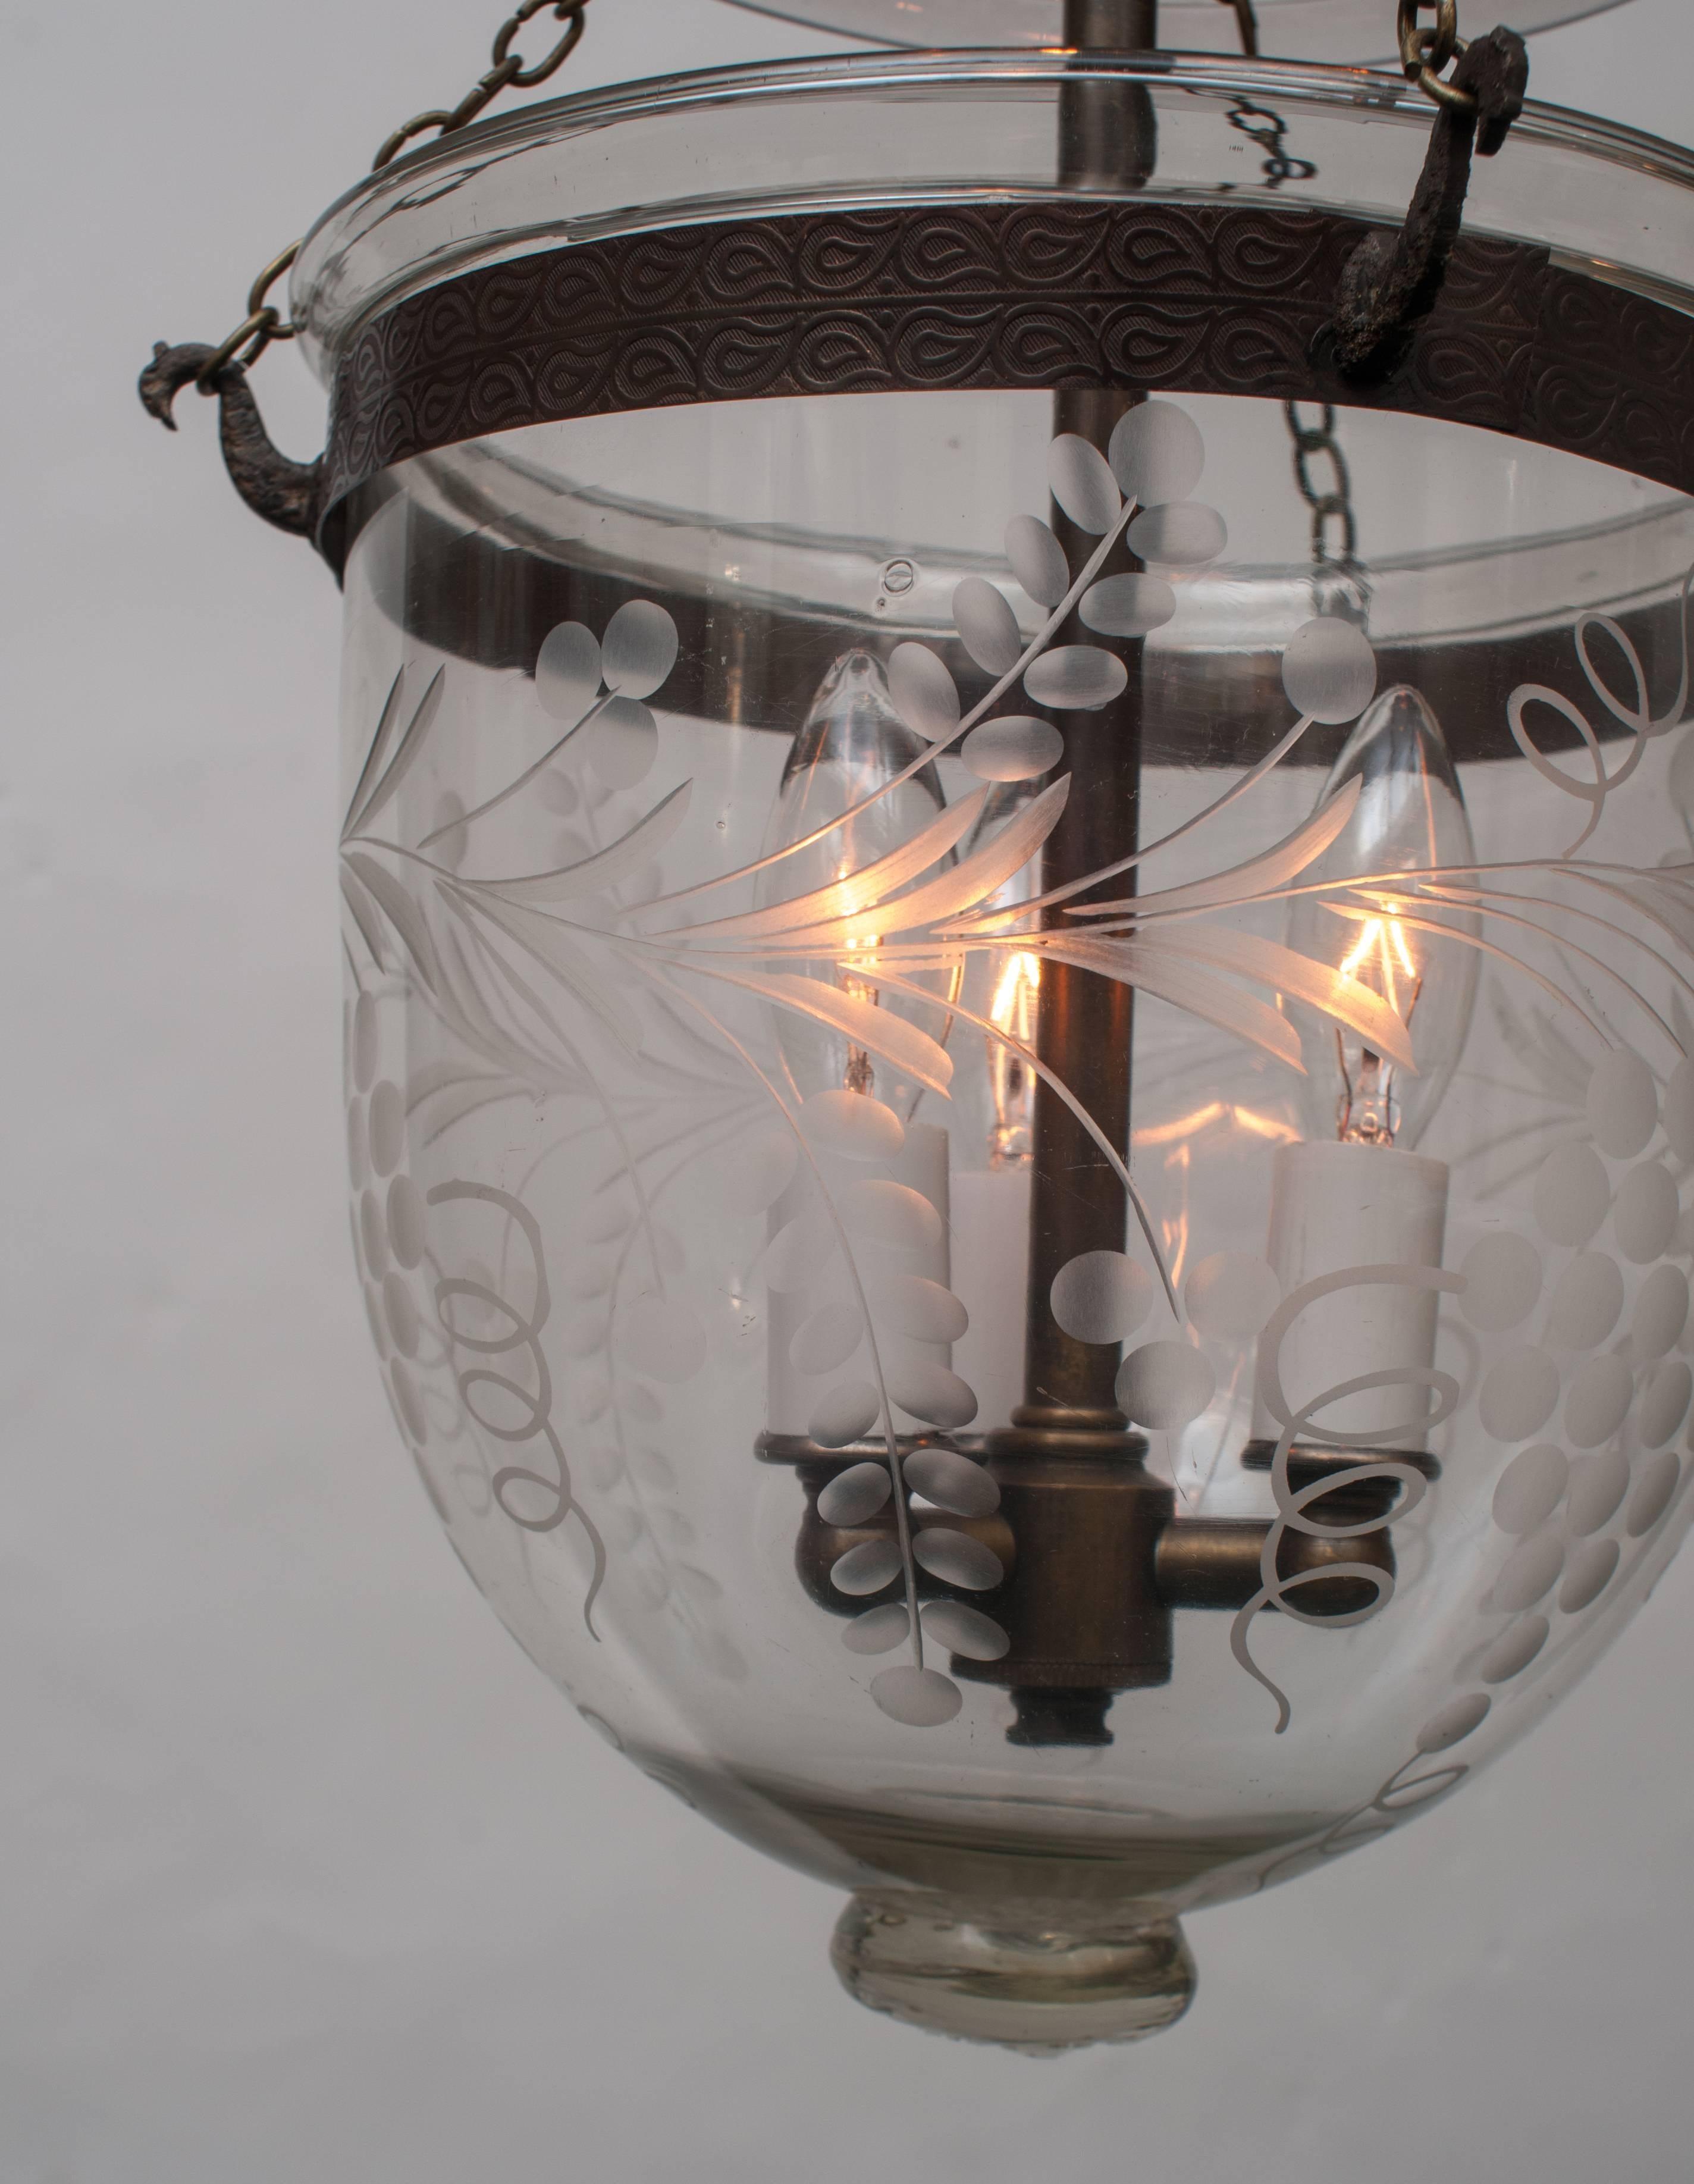 Neoclassical Bell Jar Lantern with Grape and Vine Etched Design